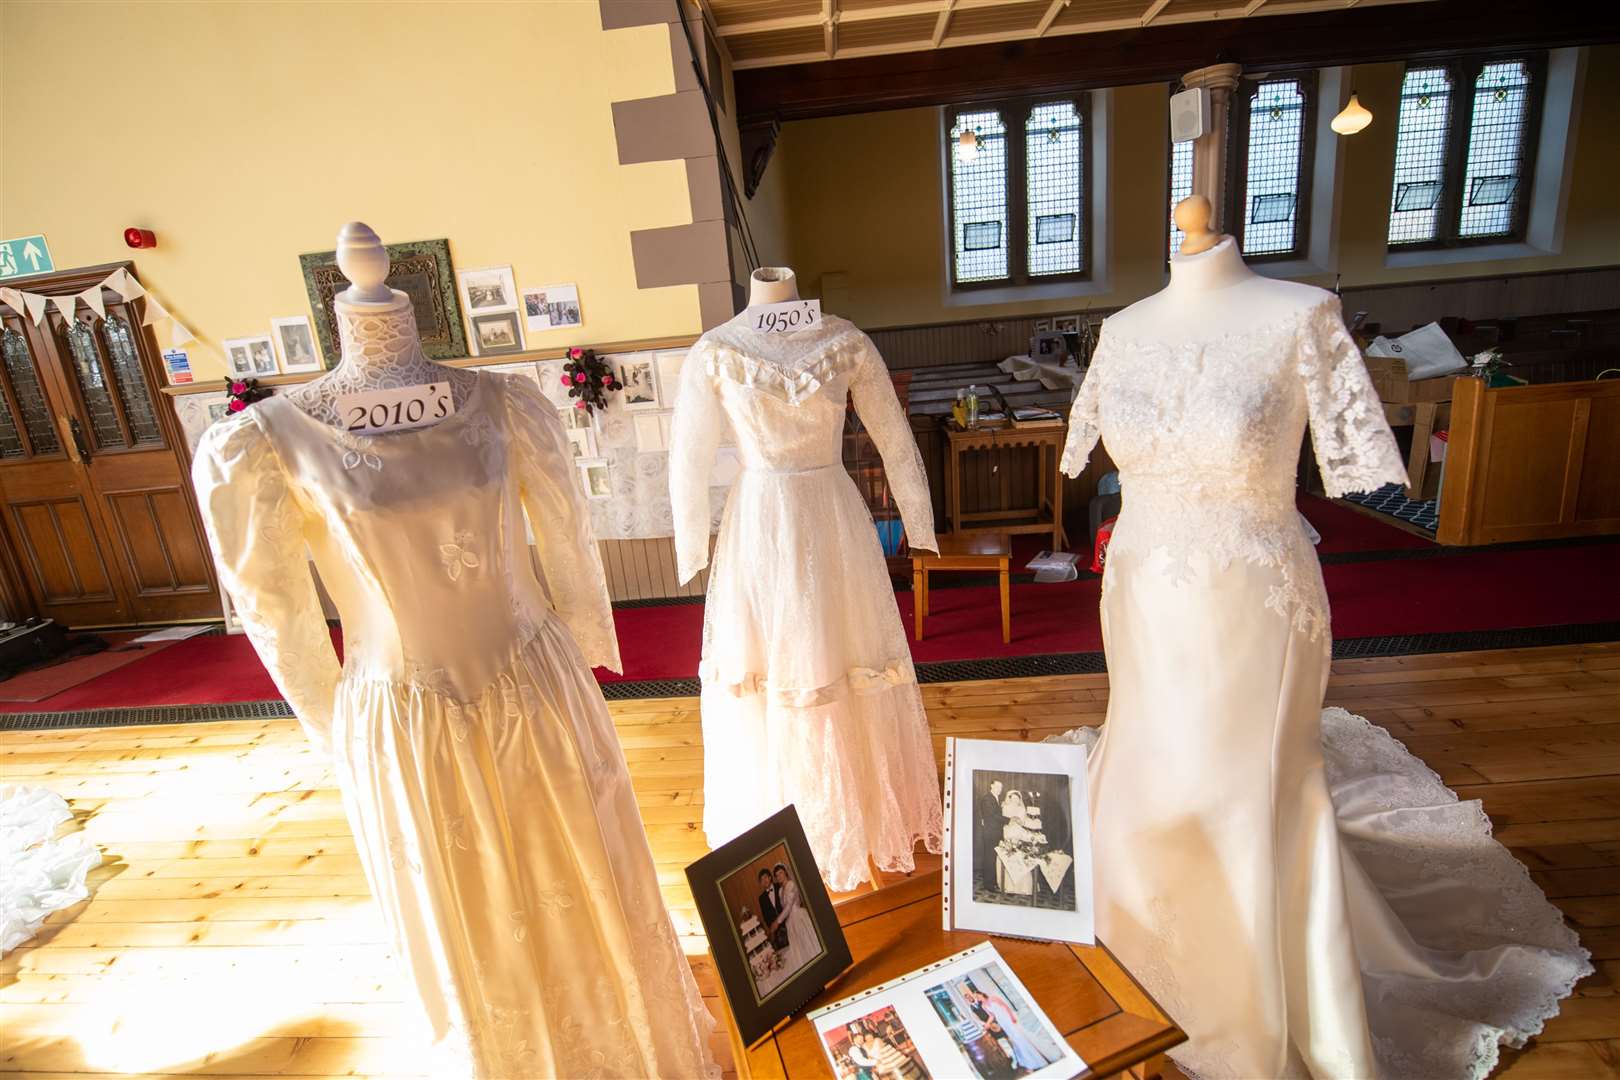 Weddings Past, Present and Future is the theme of the free exhibition.